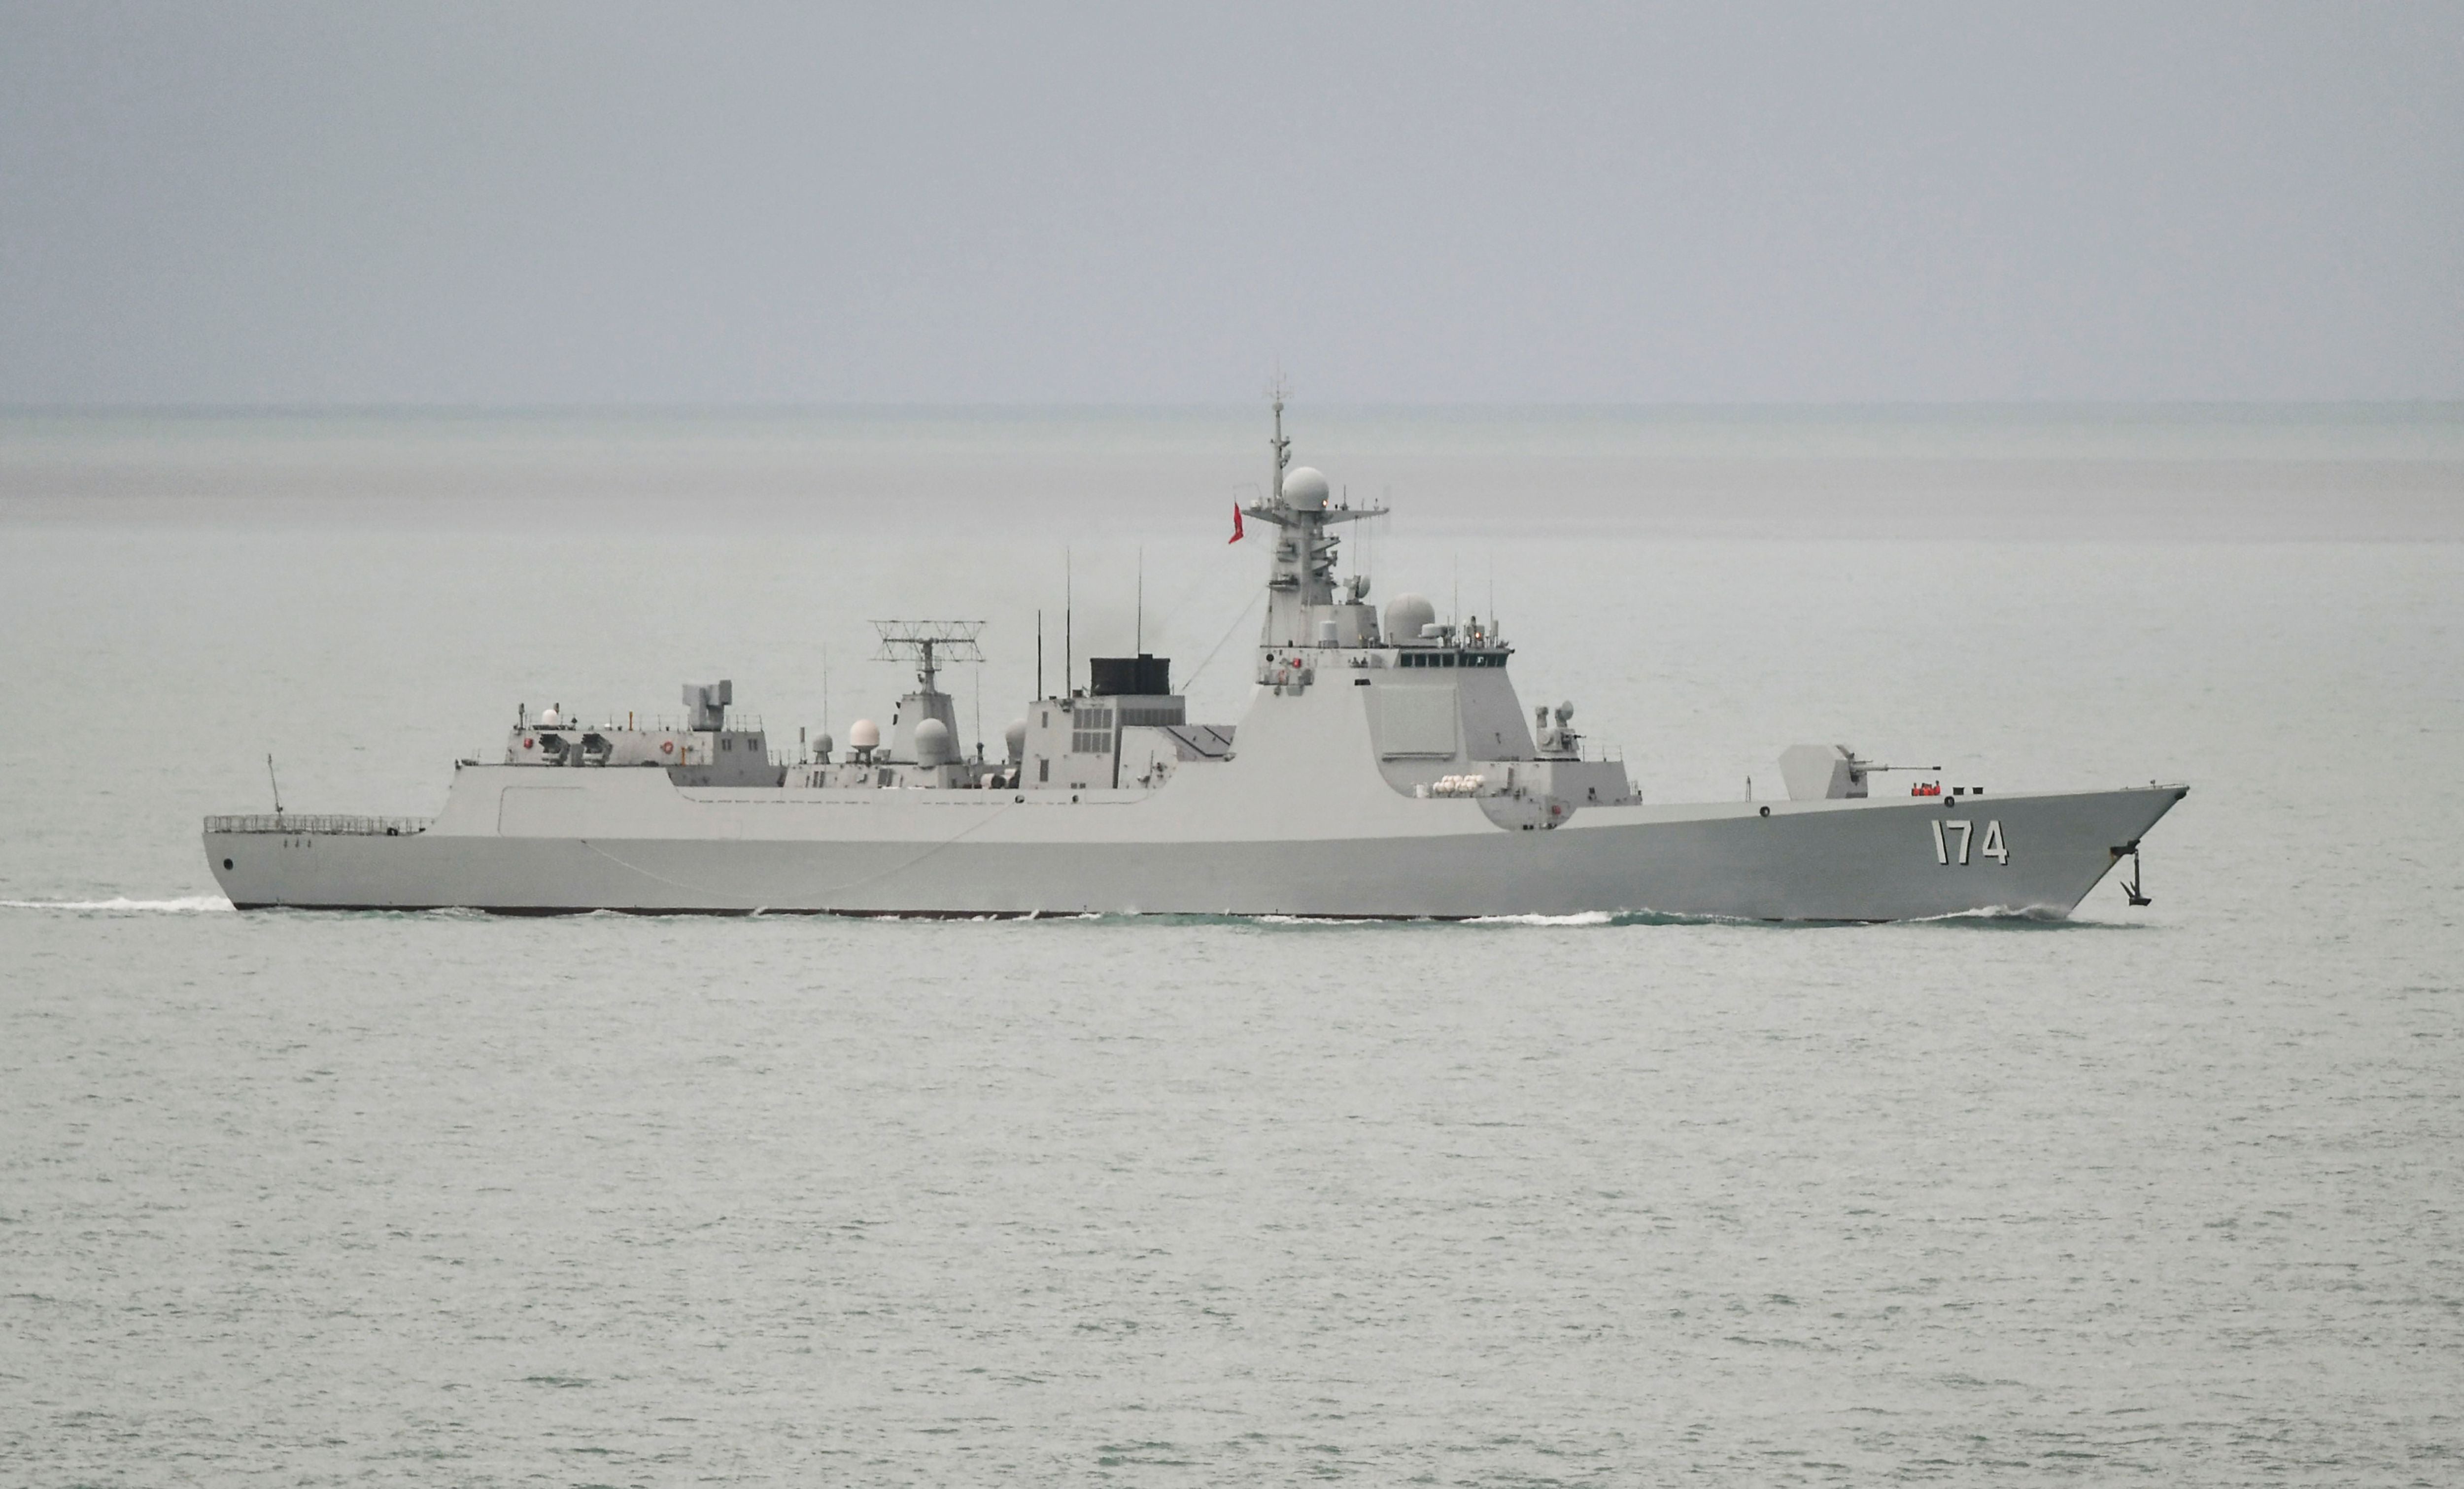 Chinese PLA-N Luyang-class guided missile destroyer after Australian forces confirmed that on 17 February 2022, a royal Australian air force (RAAF) P-8A Poseidon detected a laser illuminating the aircraft from a People’s Liberation army navy (PLA-N) vessel